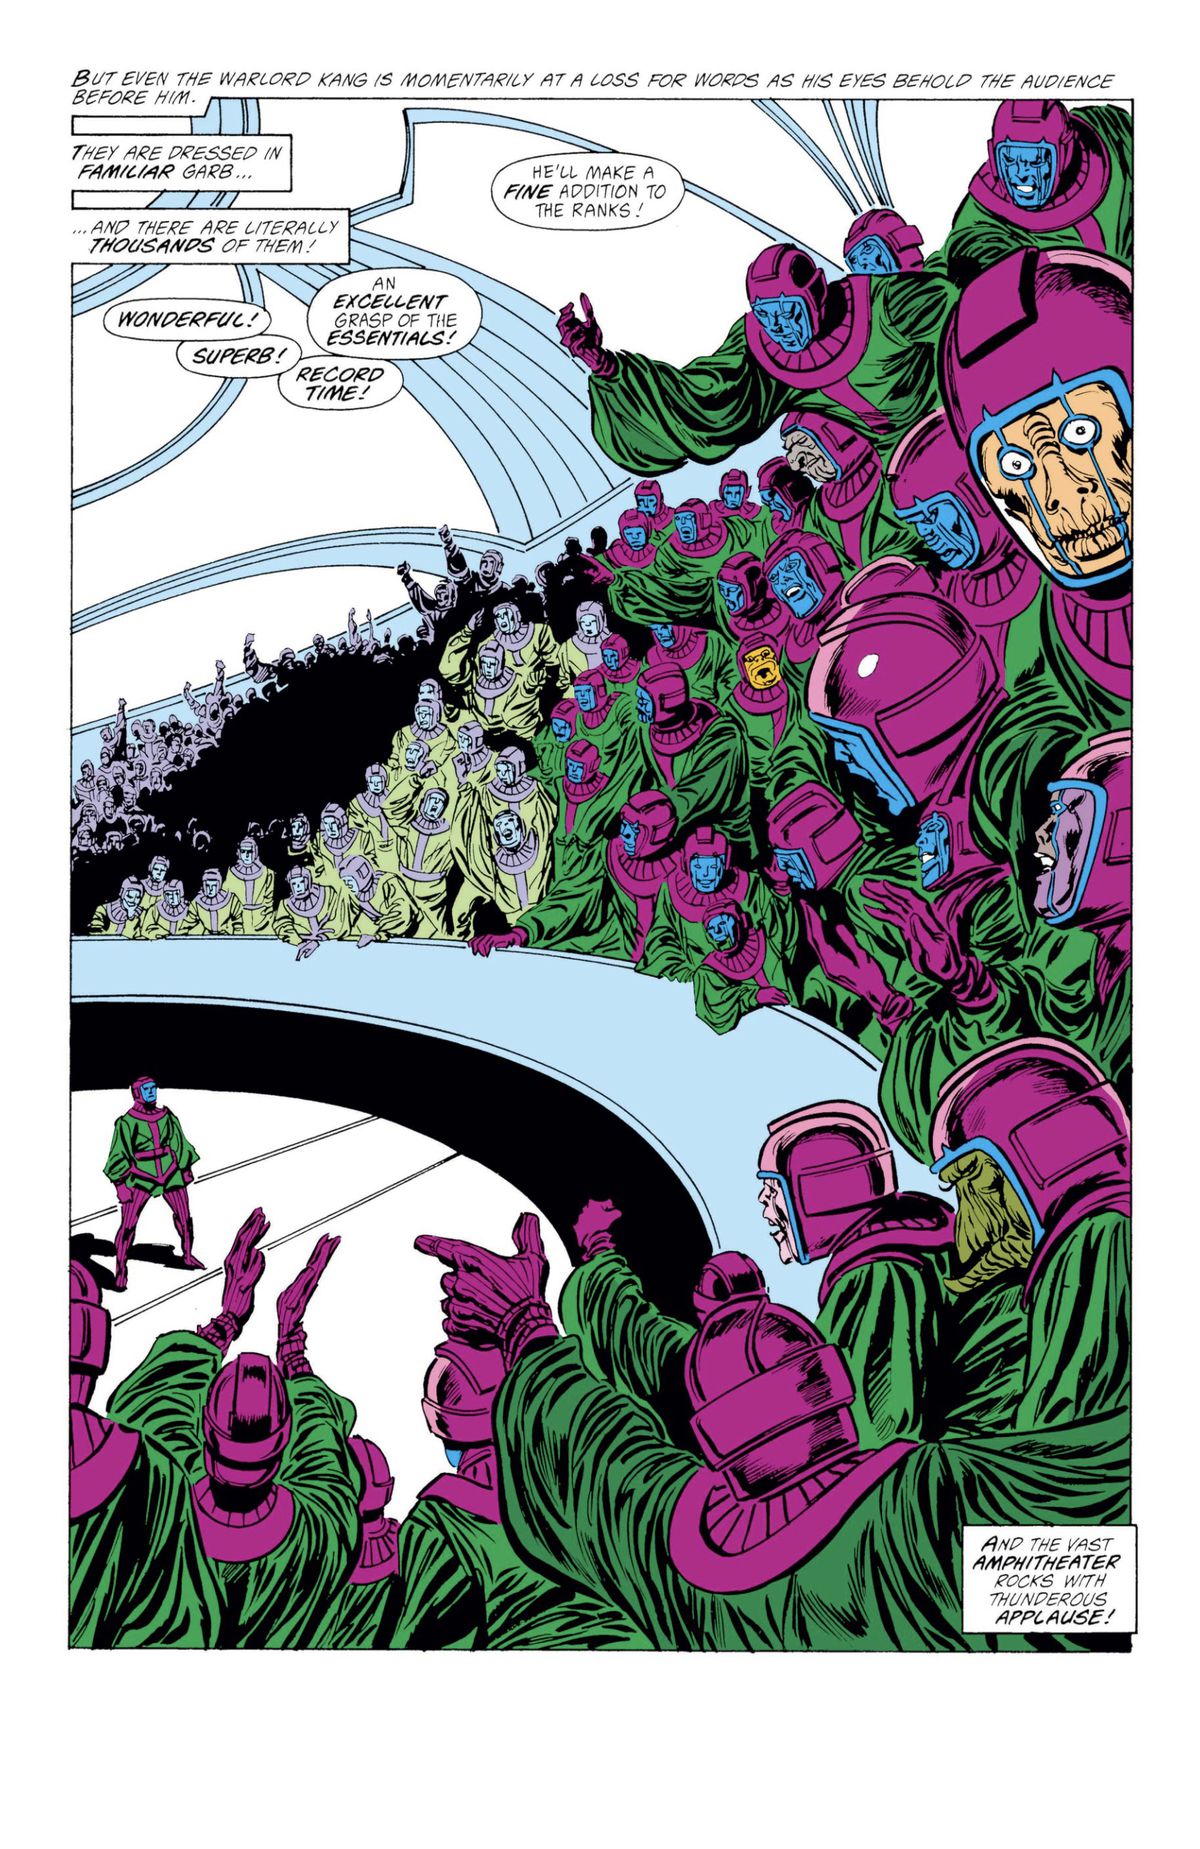 Kang stands before an arena filled with “thousands” of Kangs from other universes in the multiverse, all gesturing, clapping, and talking. “Wonderful!” “Superb!” “He’ll make a fine addition to the ranks!” in Avengers #292 (1988). 